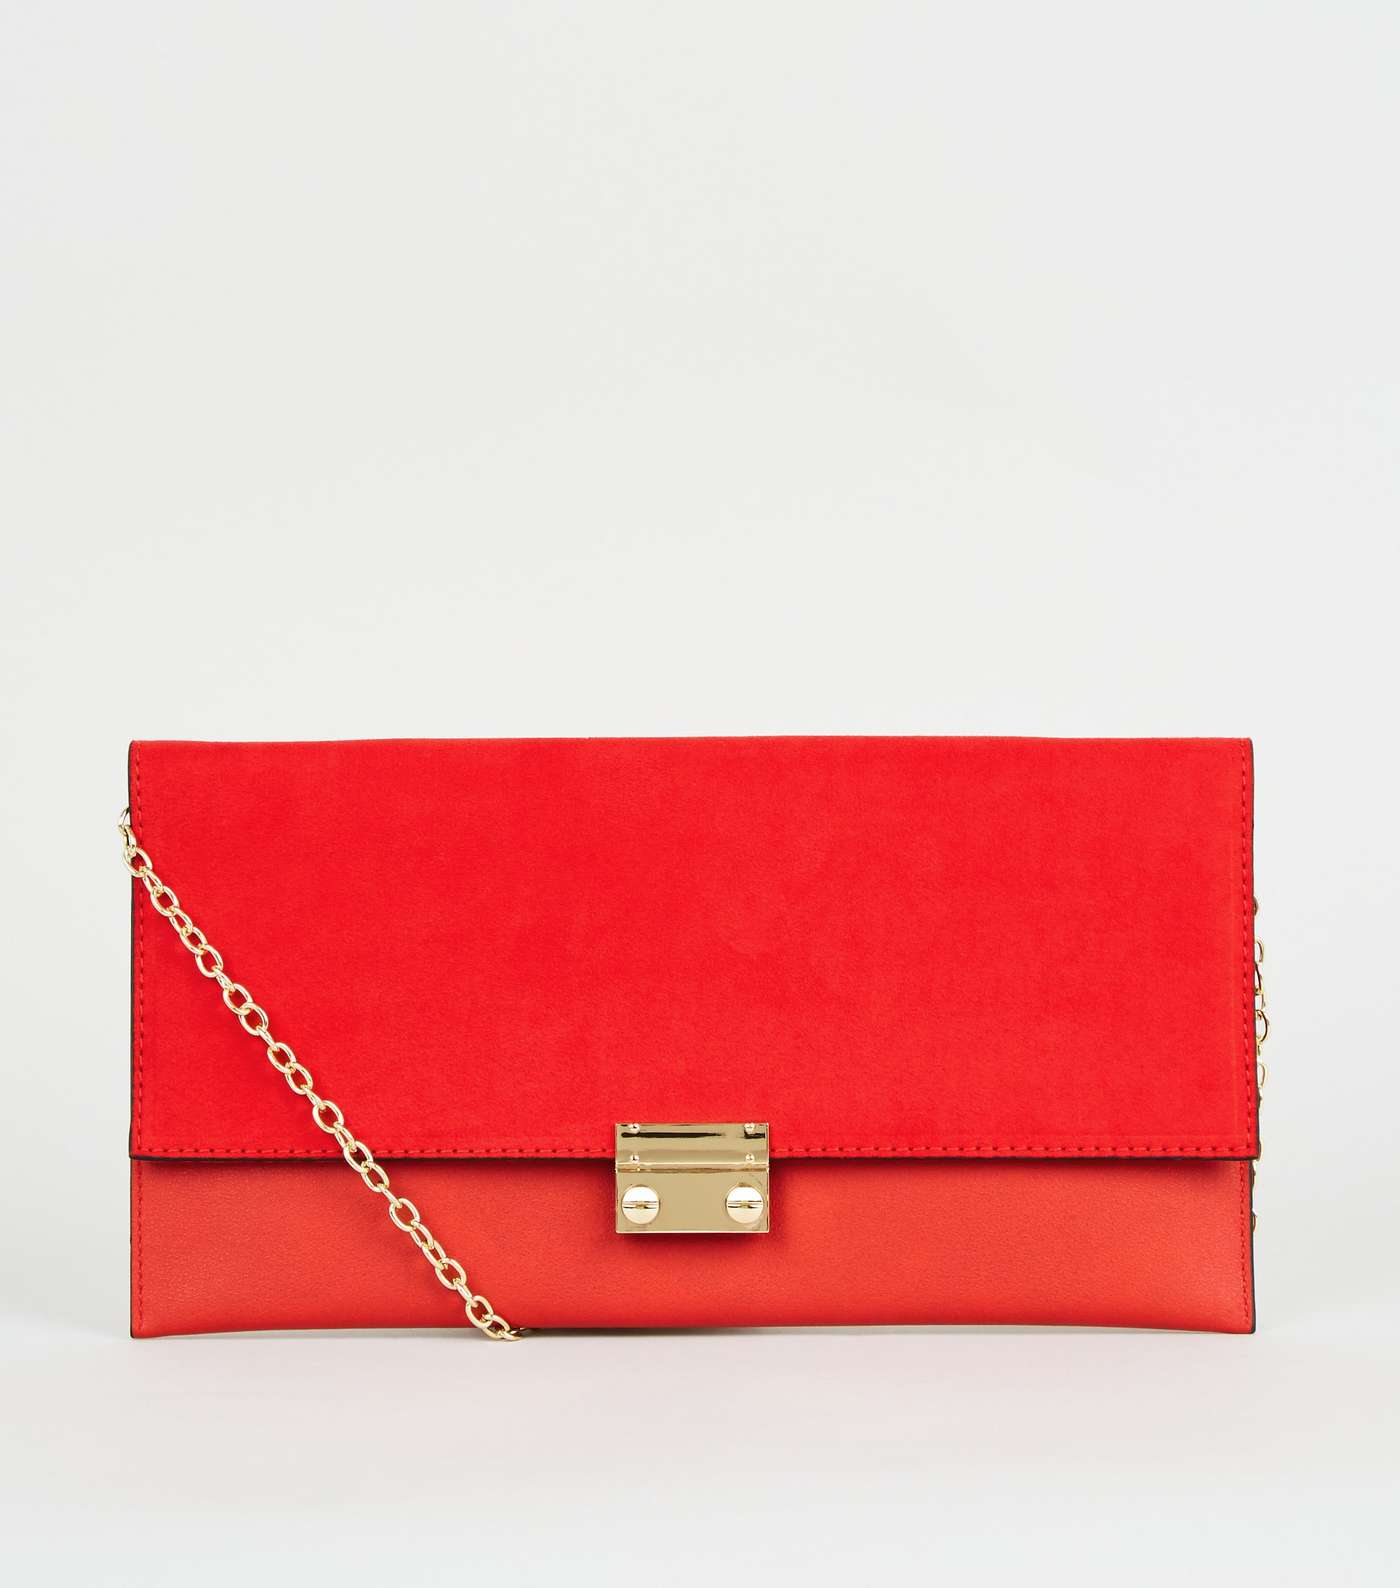 Red Leather-Look Suedette Clutch Bag